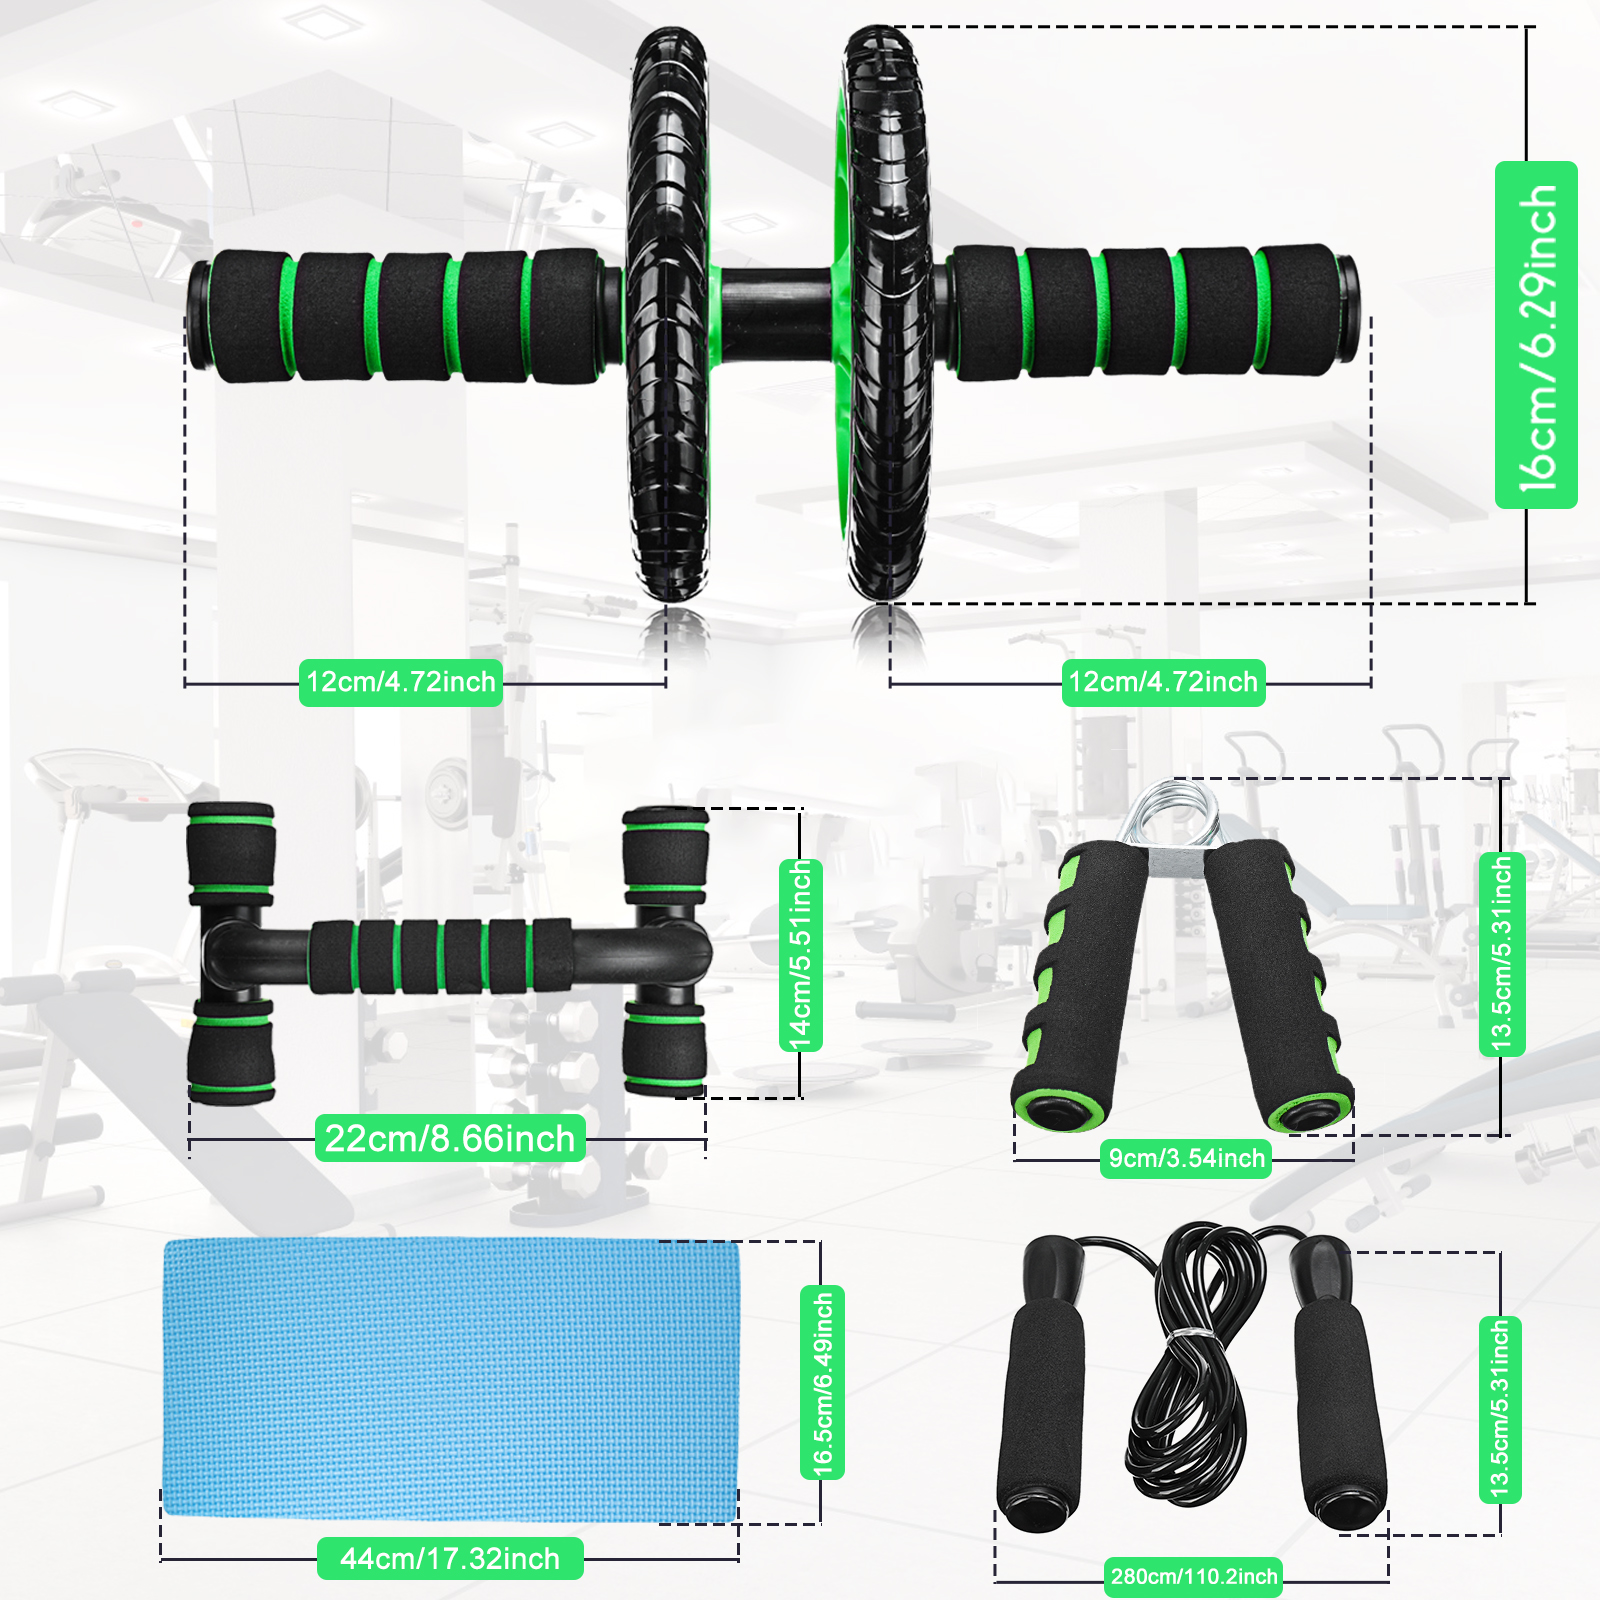 7-PcsSet-Ab-Rollers-Kit-Push-UP-Bar-Jump-Rope-Hand-Gripper-Knee-Pad-Resistance-Band-Exercise-Trainin-1810079-3